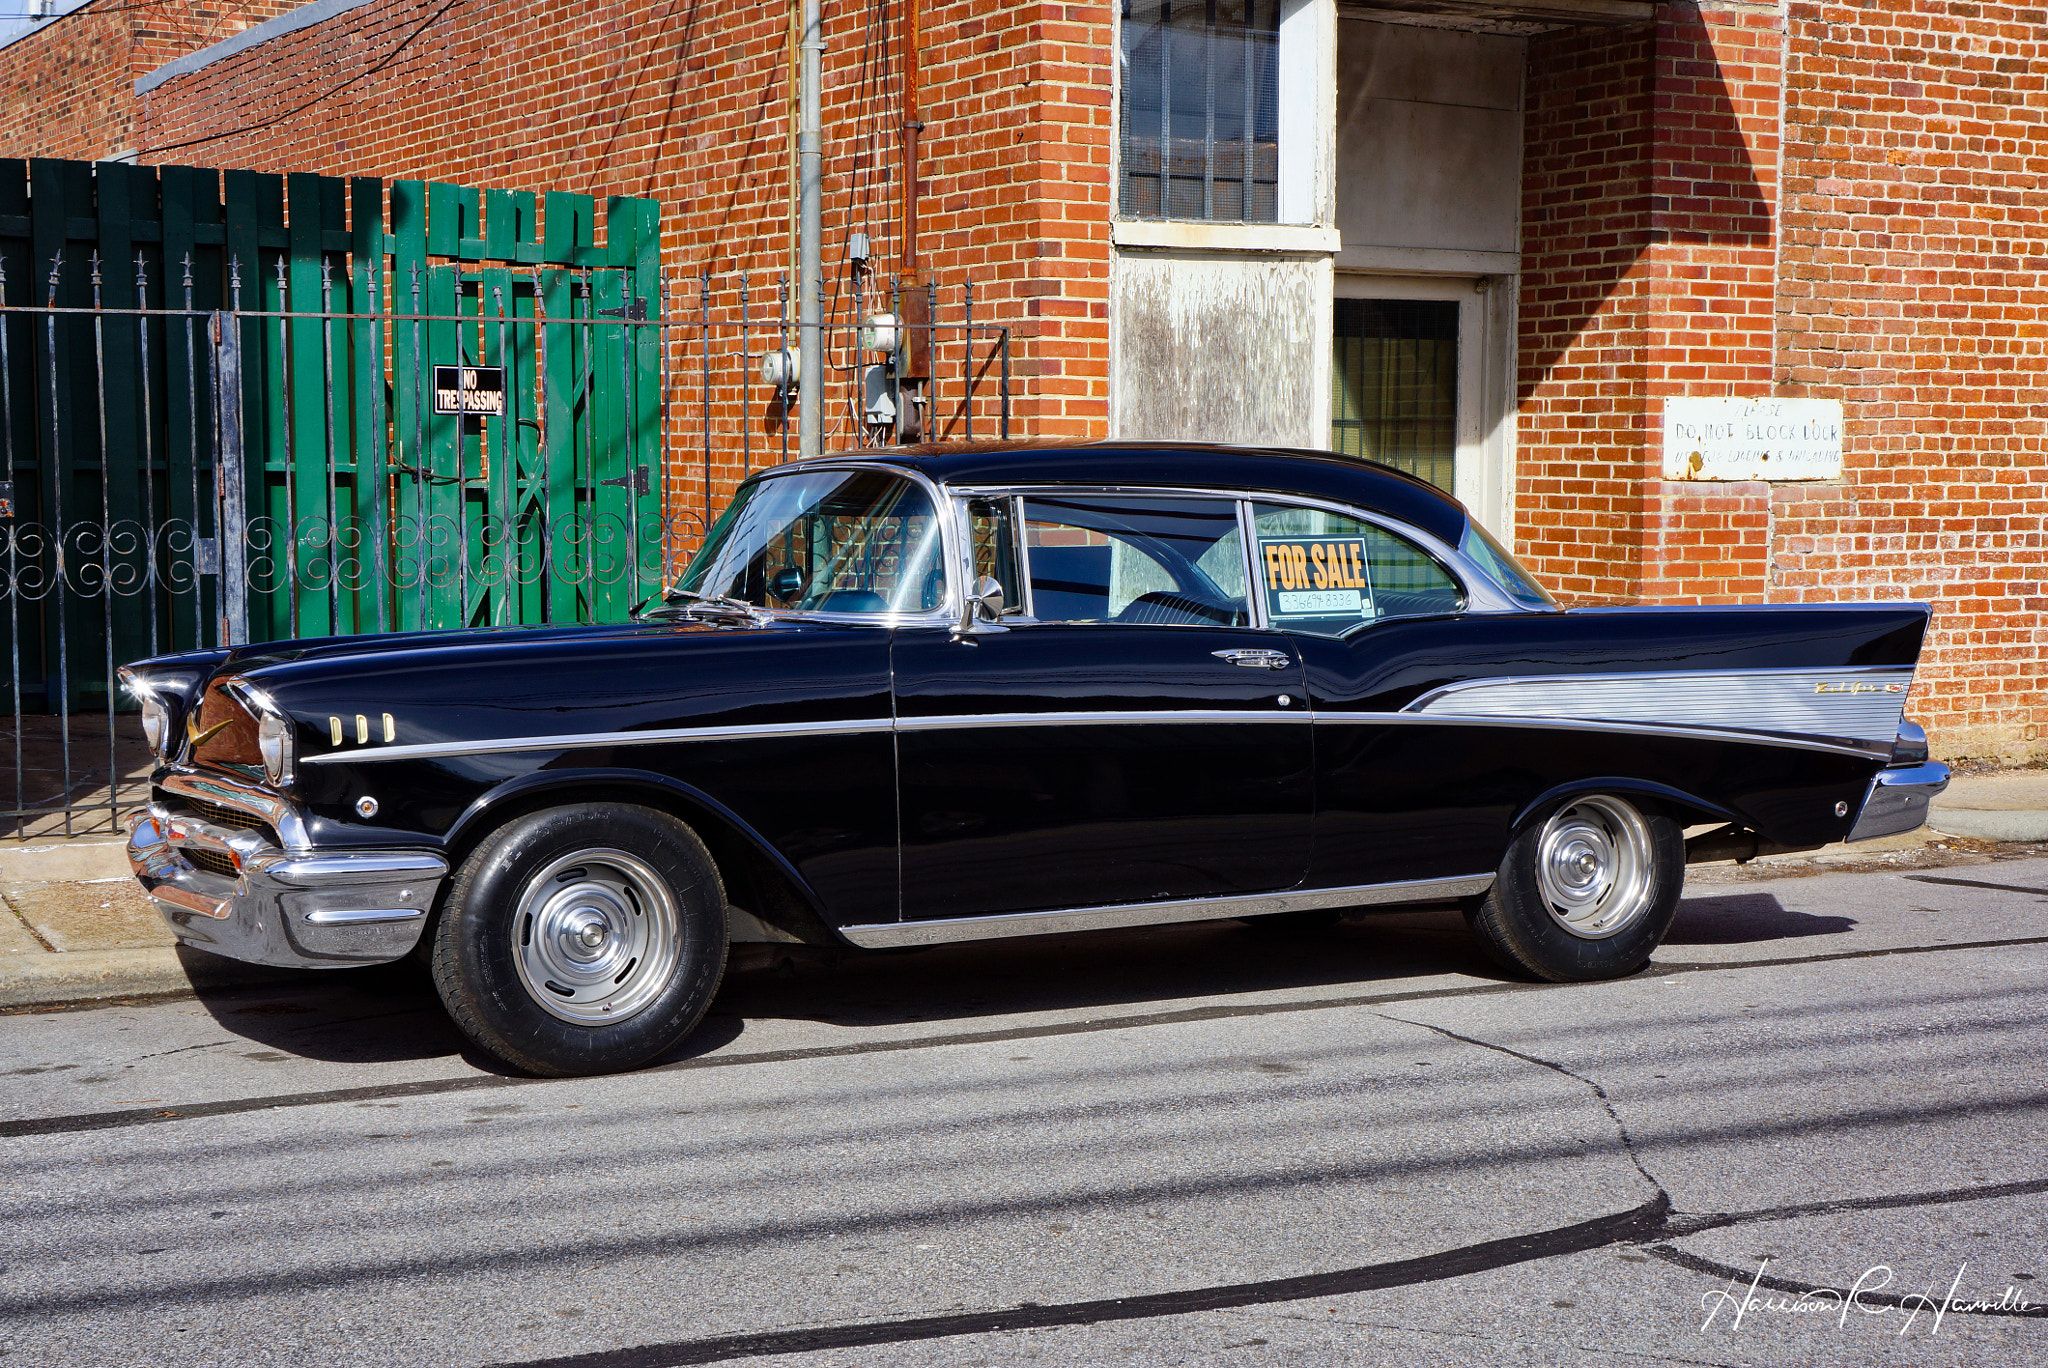 Hasselblad Lunar sample photo. 57 chevy photography